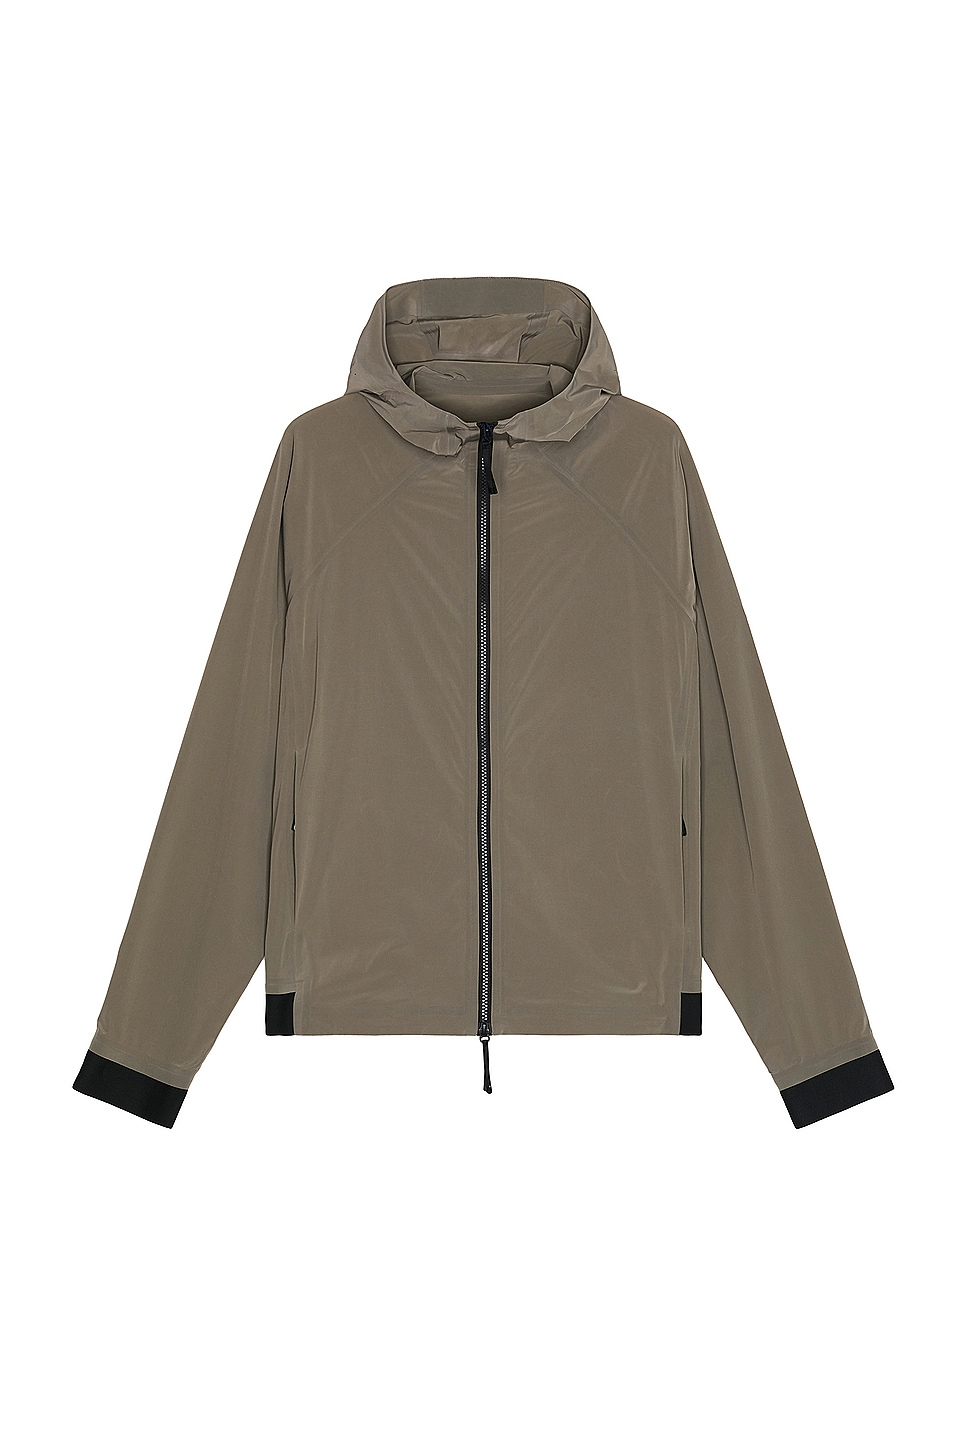 Image 1 of Moncler Kurz Jacket in Taupe